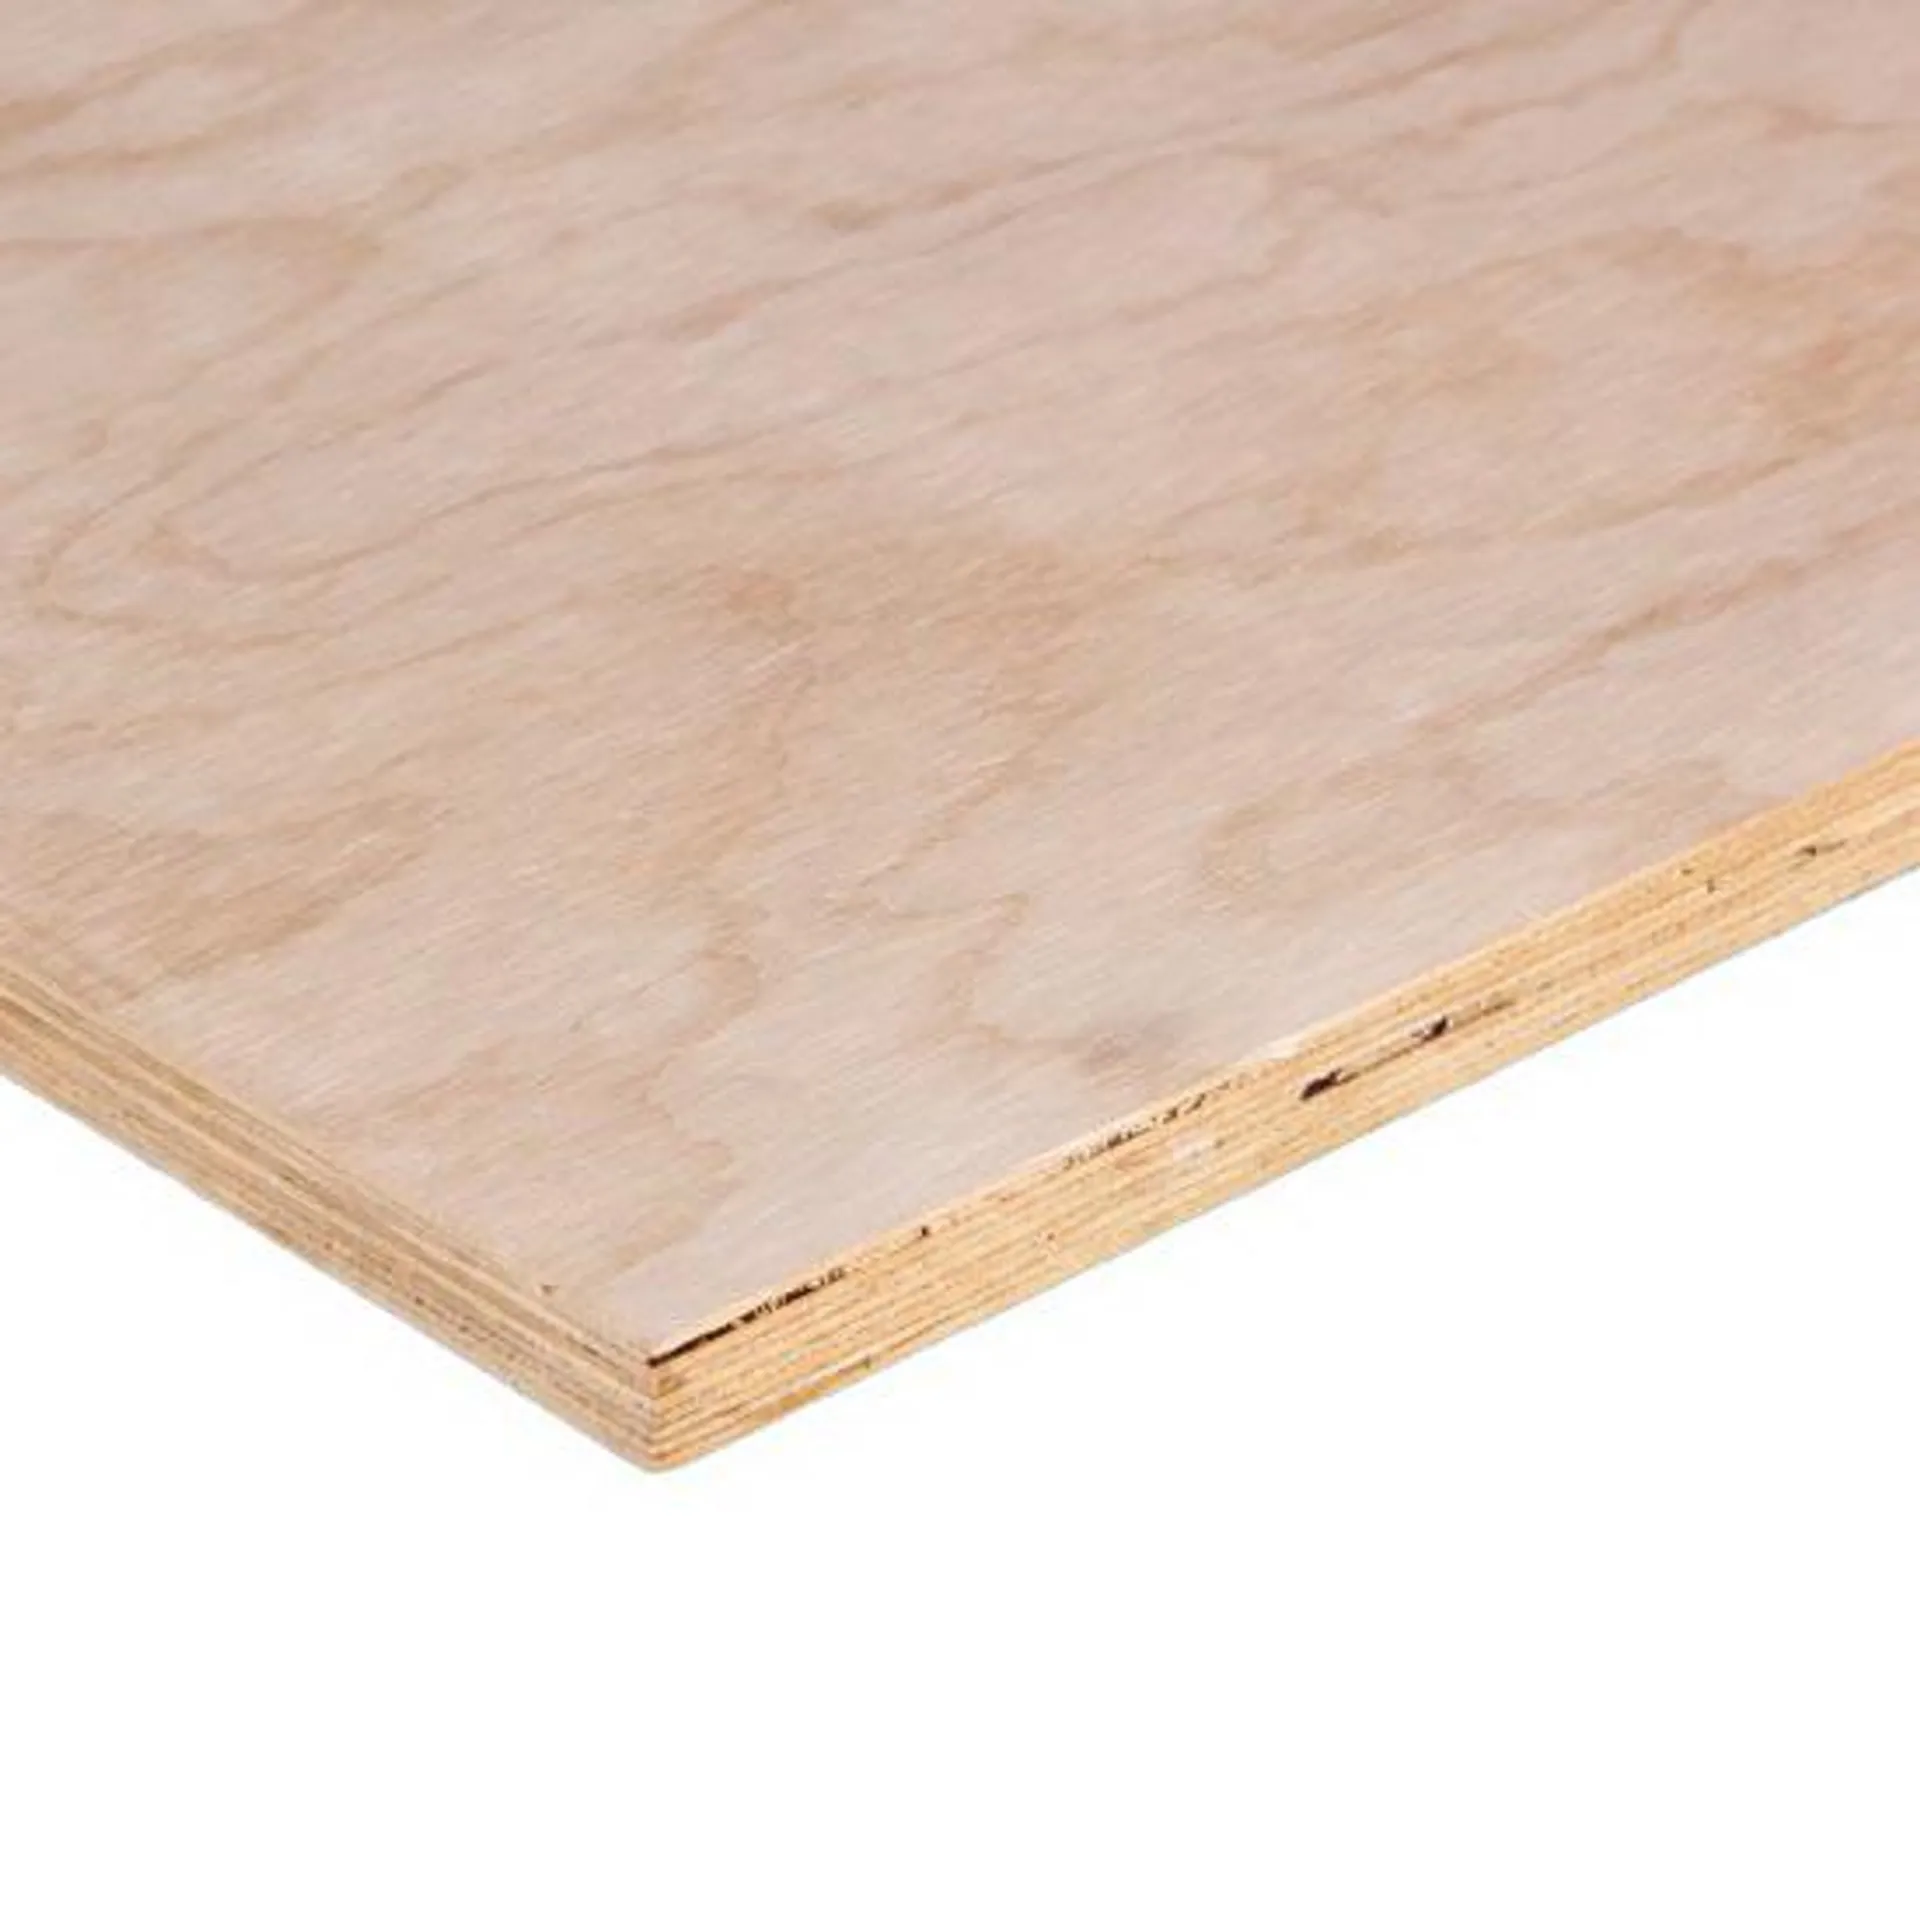 BC Plywood, 23/32 in x 2 ft x 2 ft - Southern Pine